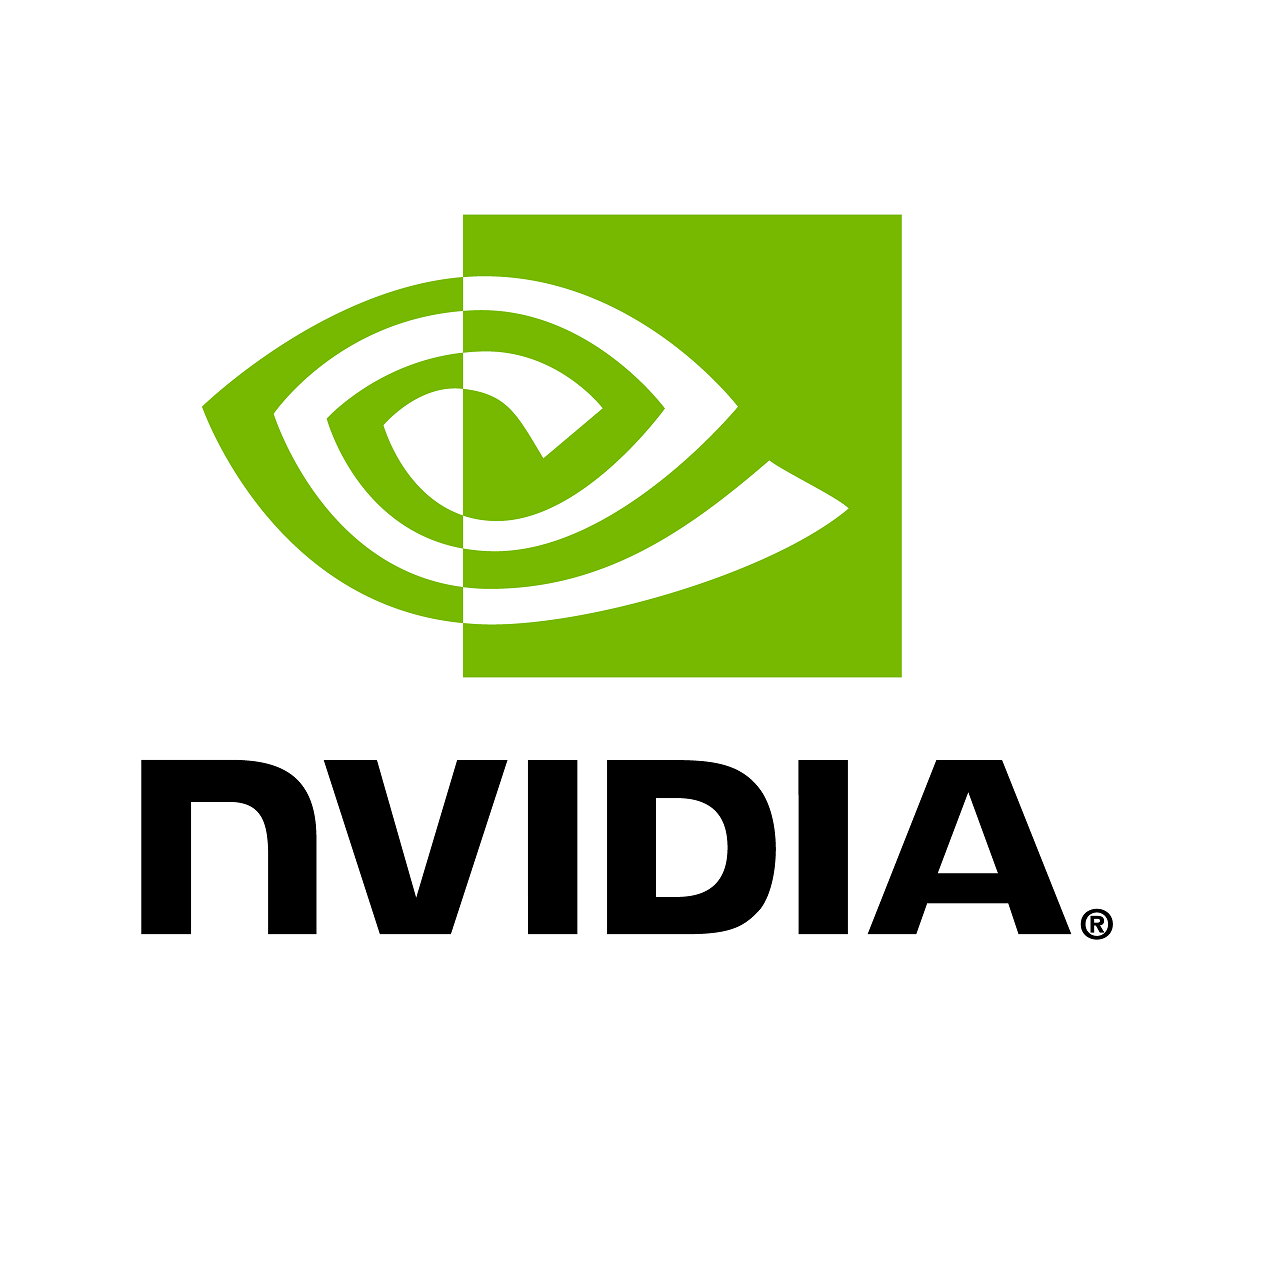 NVIDIA Support and Warranty, Silver, 5 Years, for SN2000 Series Switch